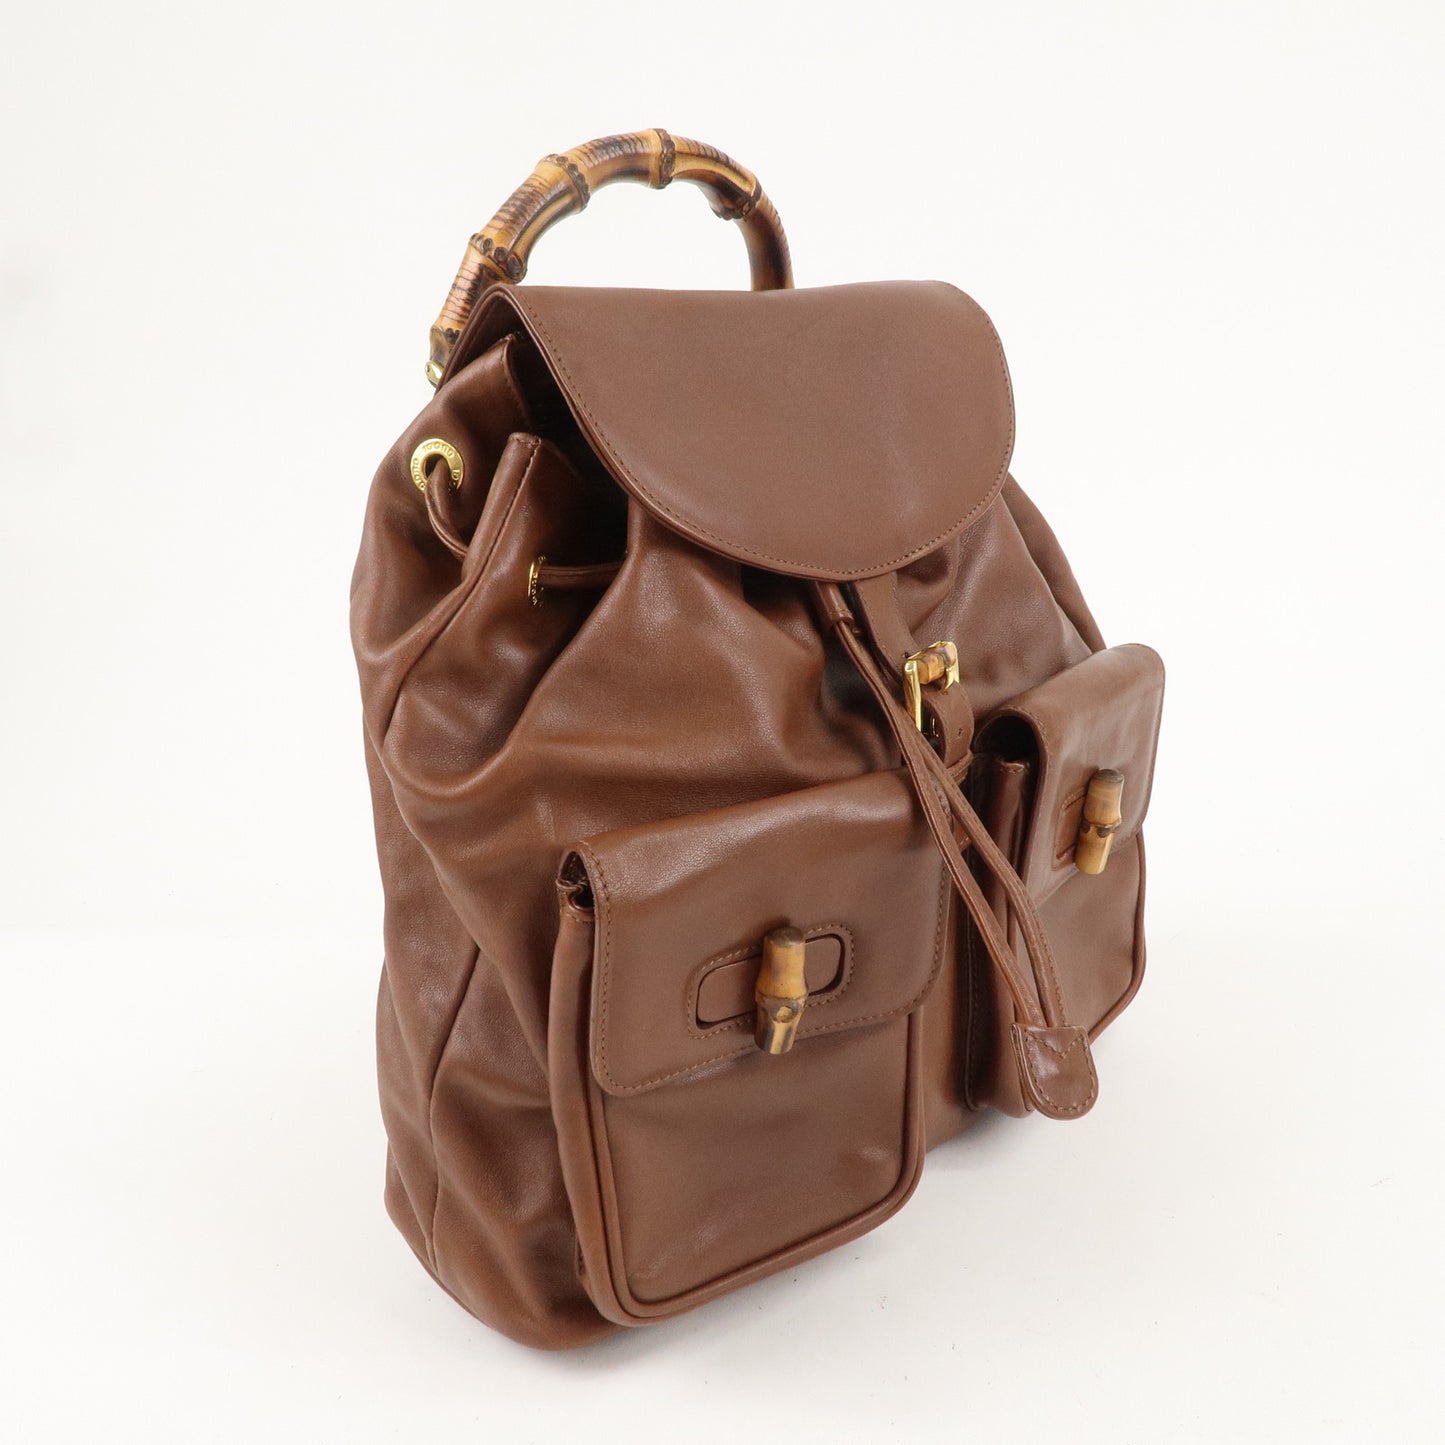 GUCCI Bamboo Leather Back Pack Brown 003.2058.0016